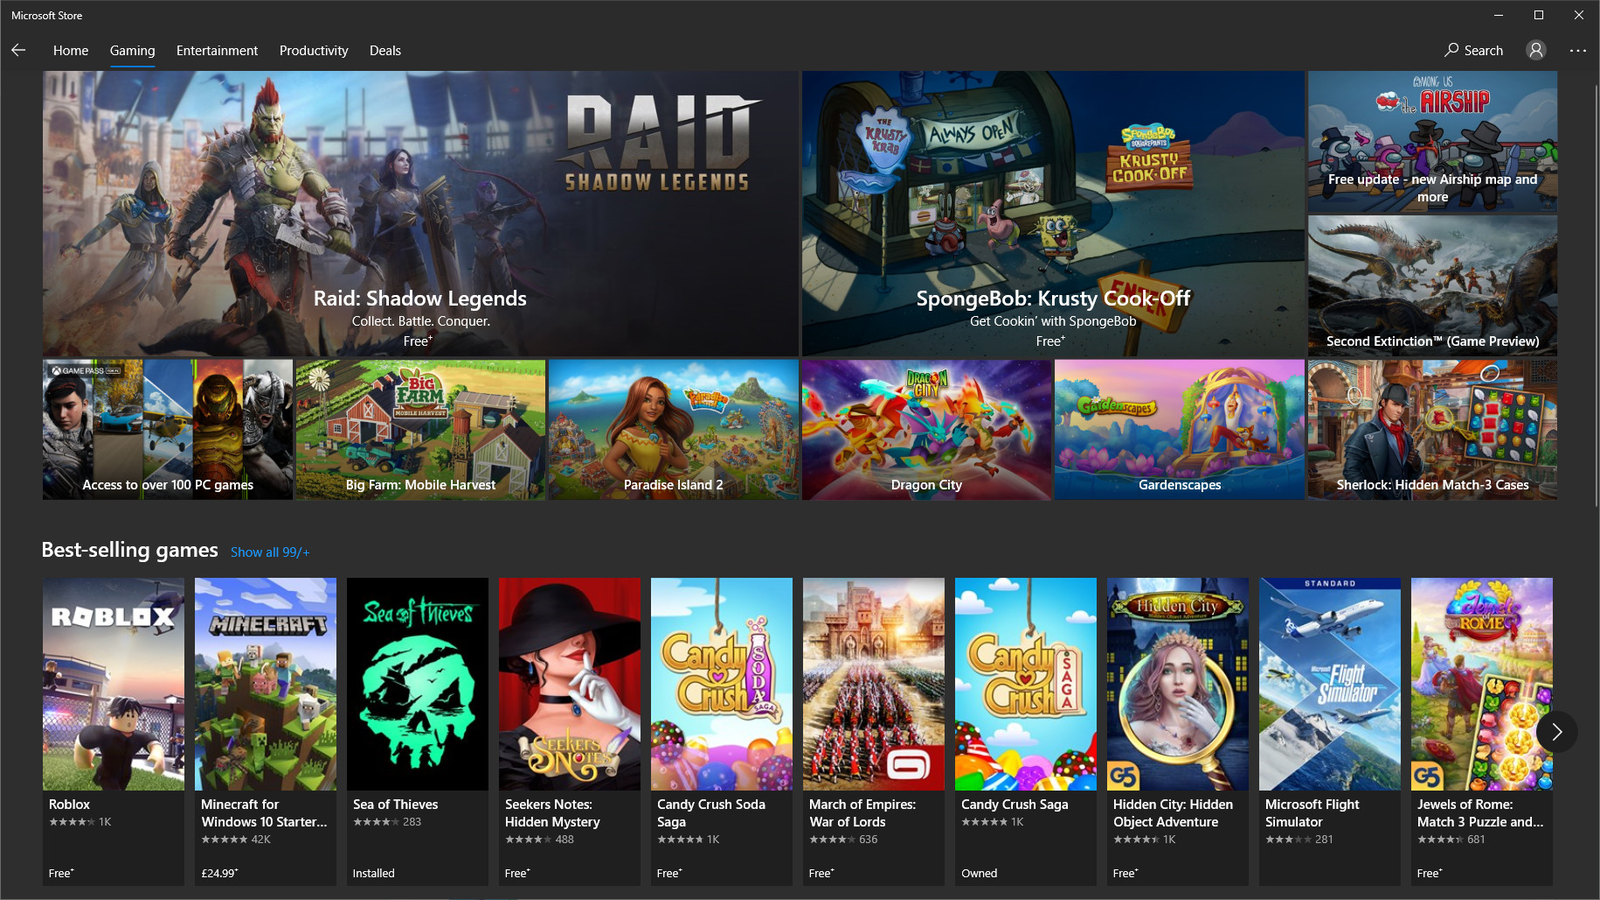 League of Legends and other Riot Games start appearing in the Microsoft  Store on Windows